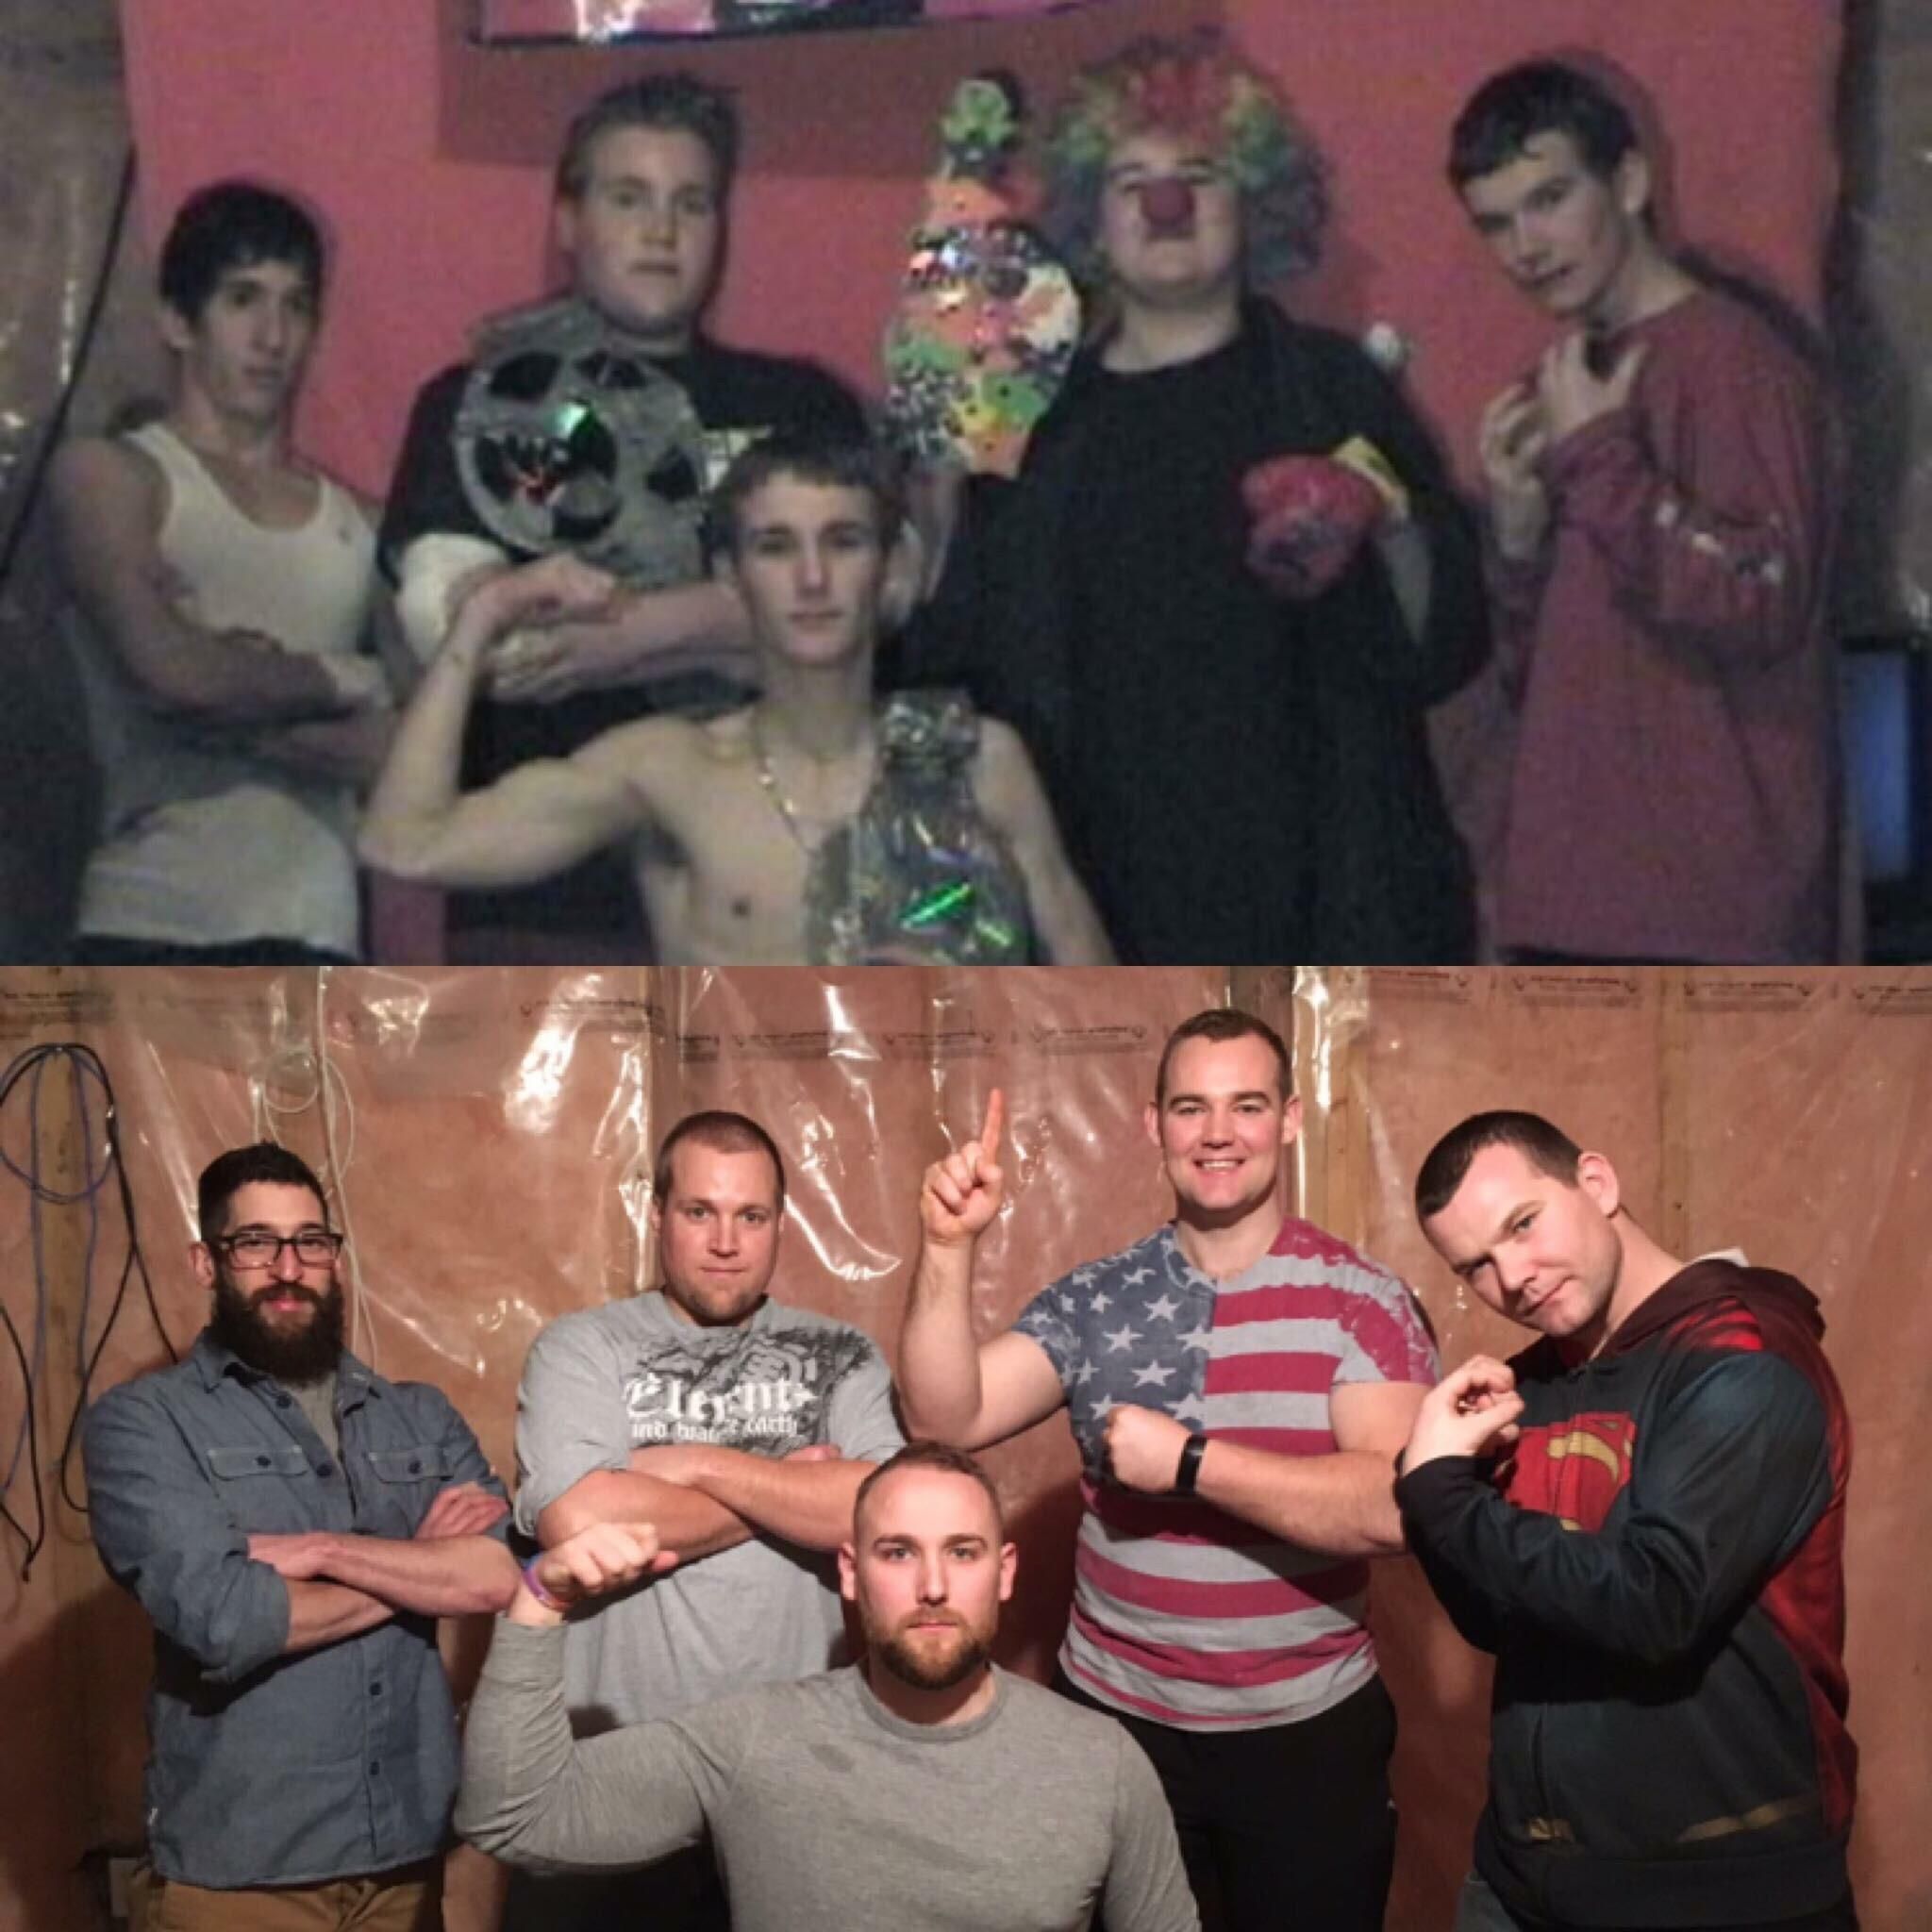 My brothers and I recreated a photo we took 16 years ago. We had our own BASEMENT WRESTLING league